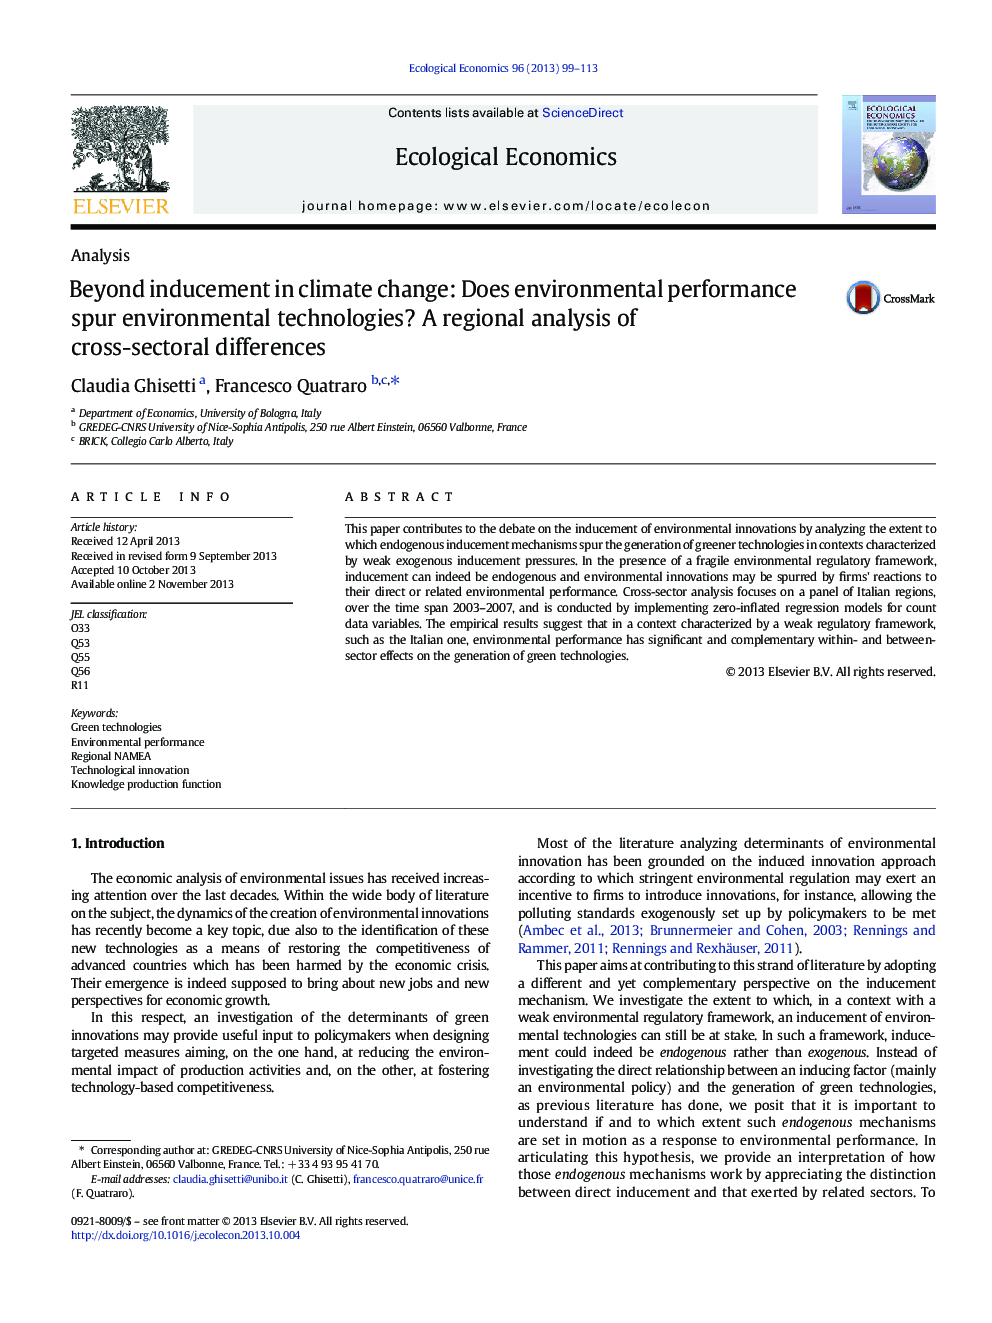 Beyond inducement in climate change: Does environmental performance spur environmental technologies? A regional analysis of cross-sectoral differences